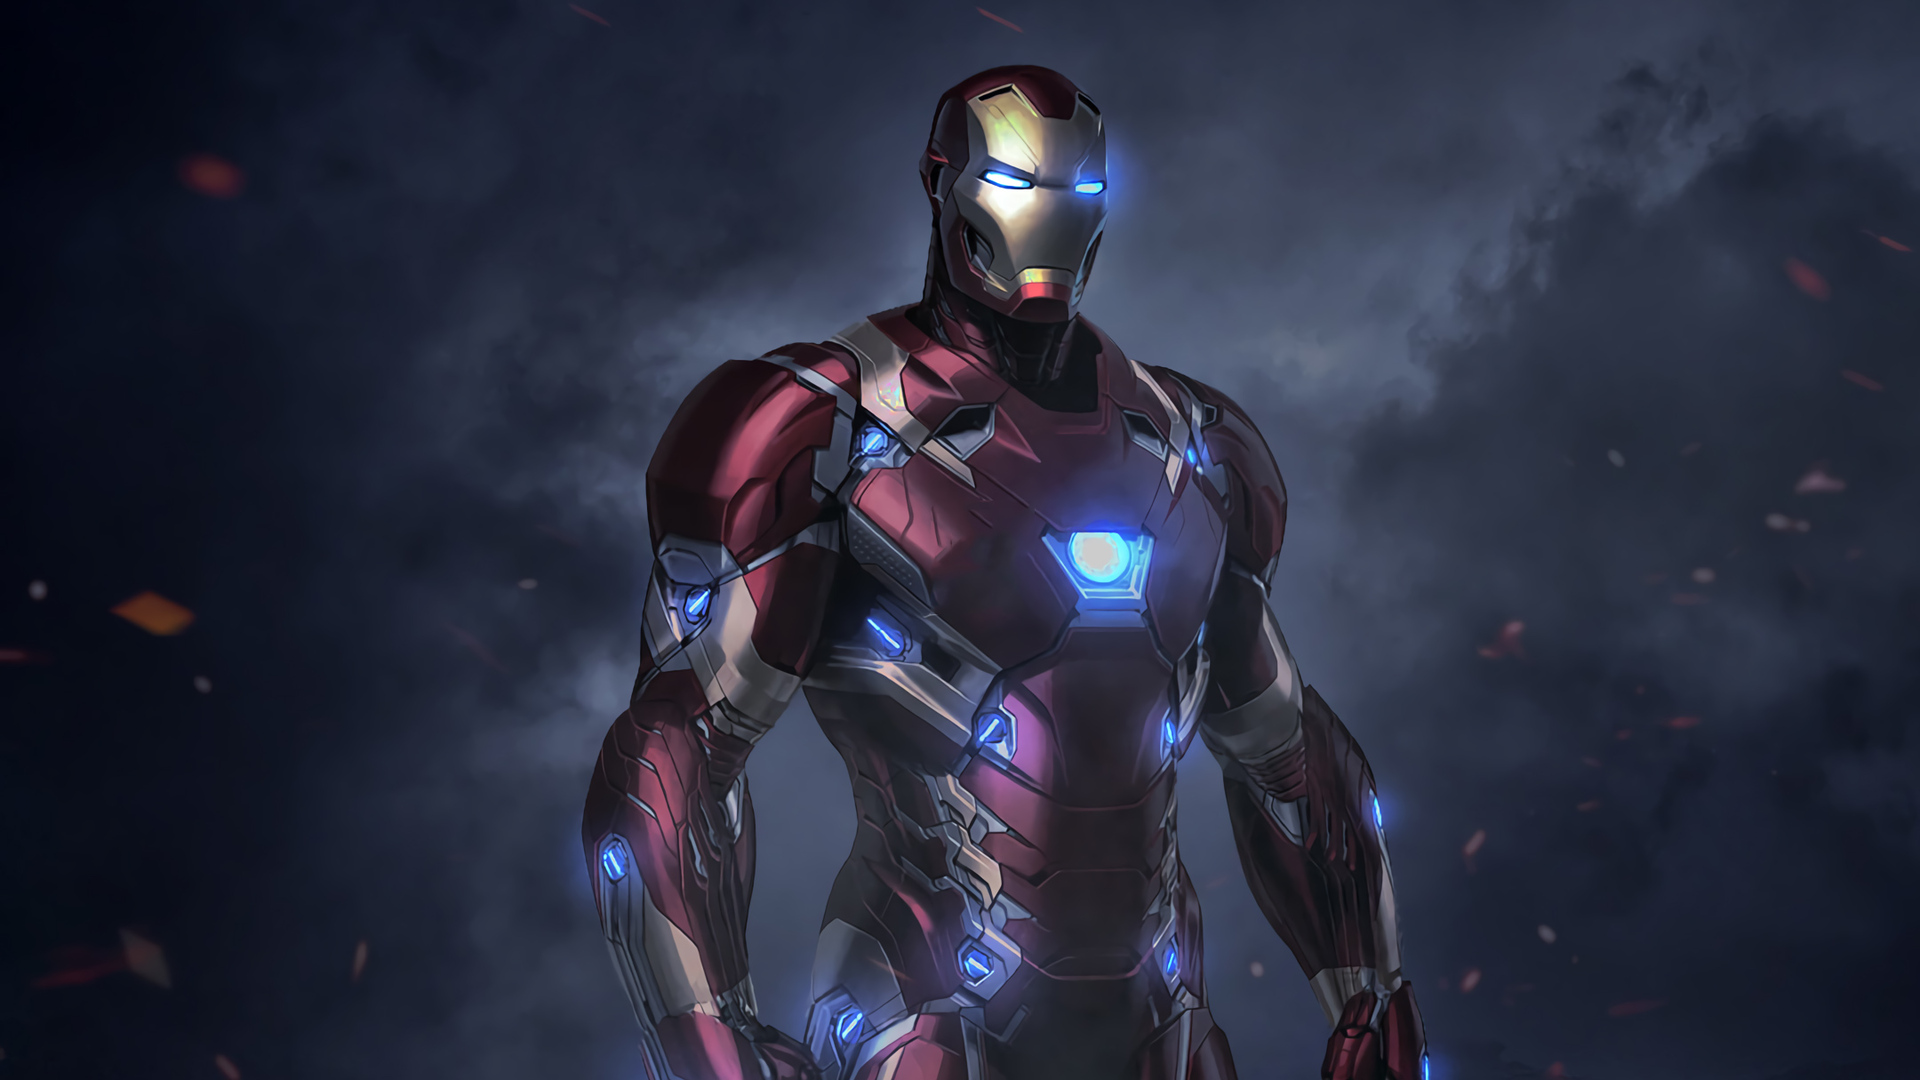 New Iron Man Wallpapers